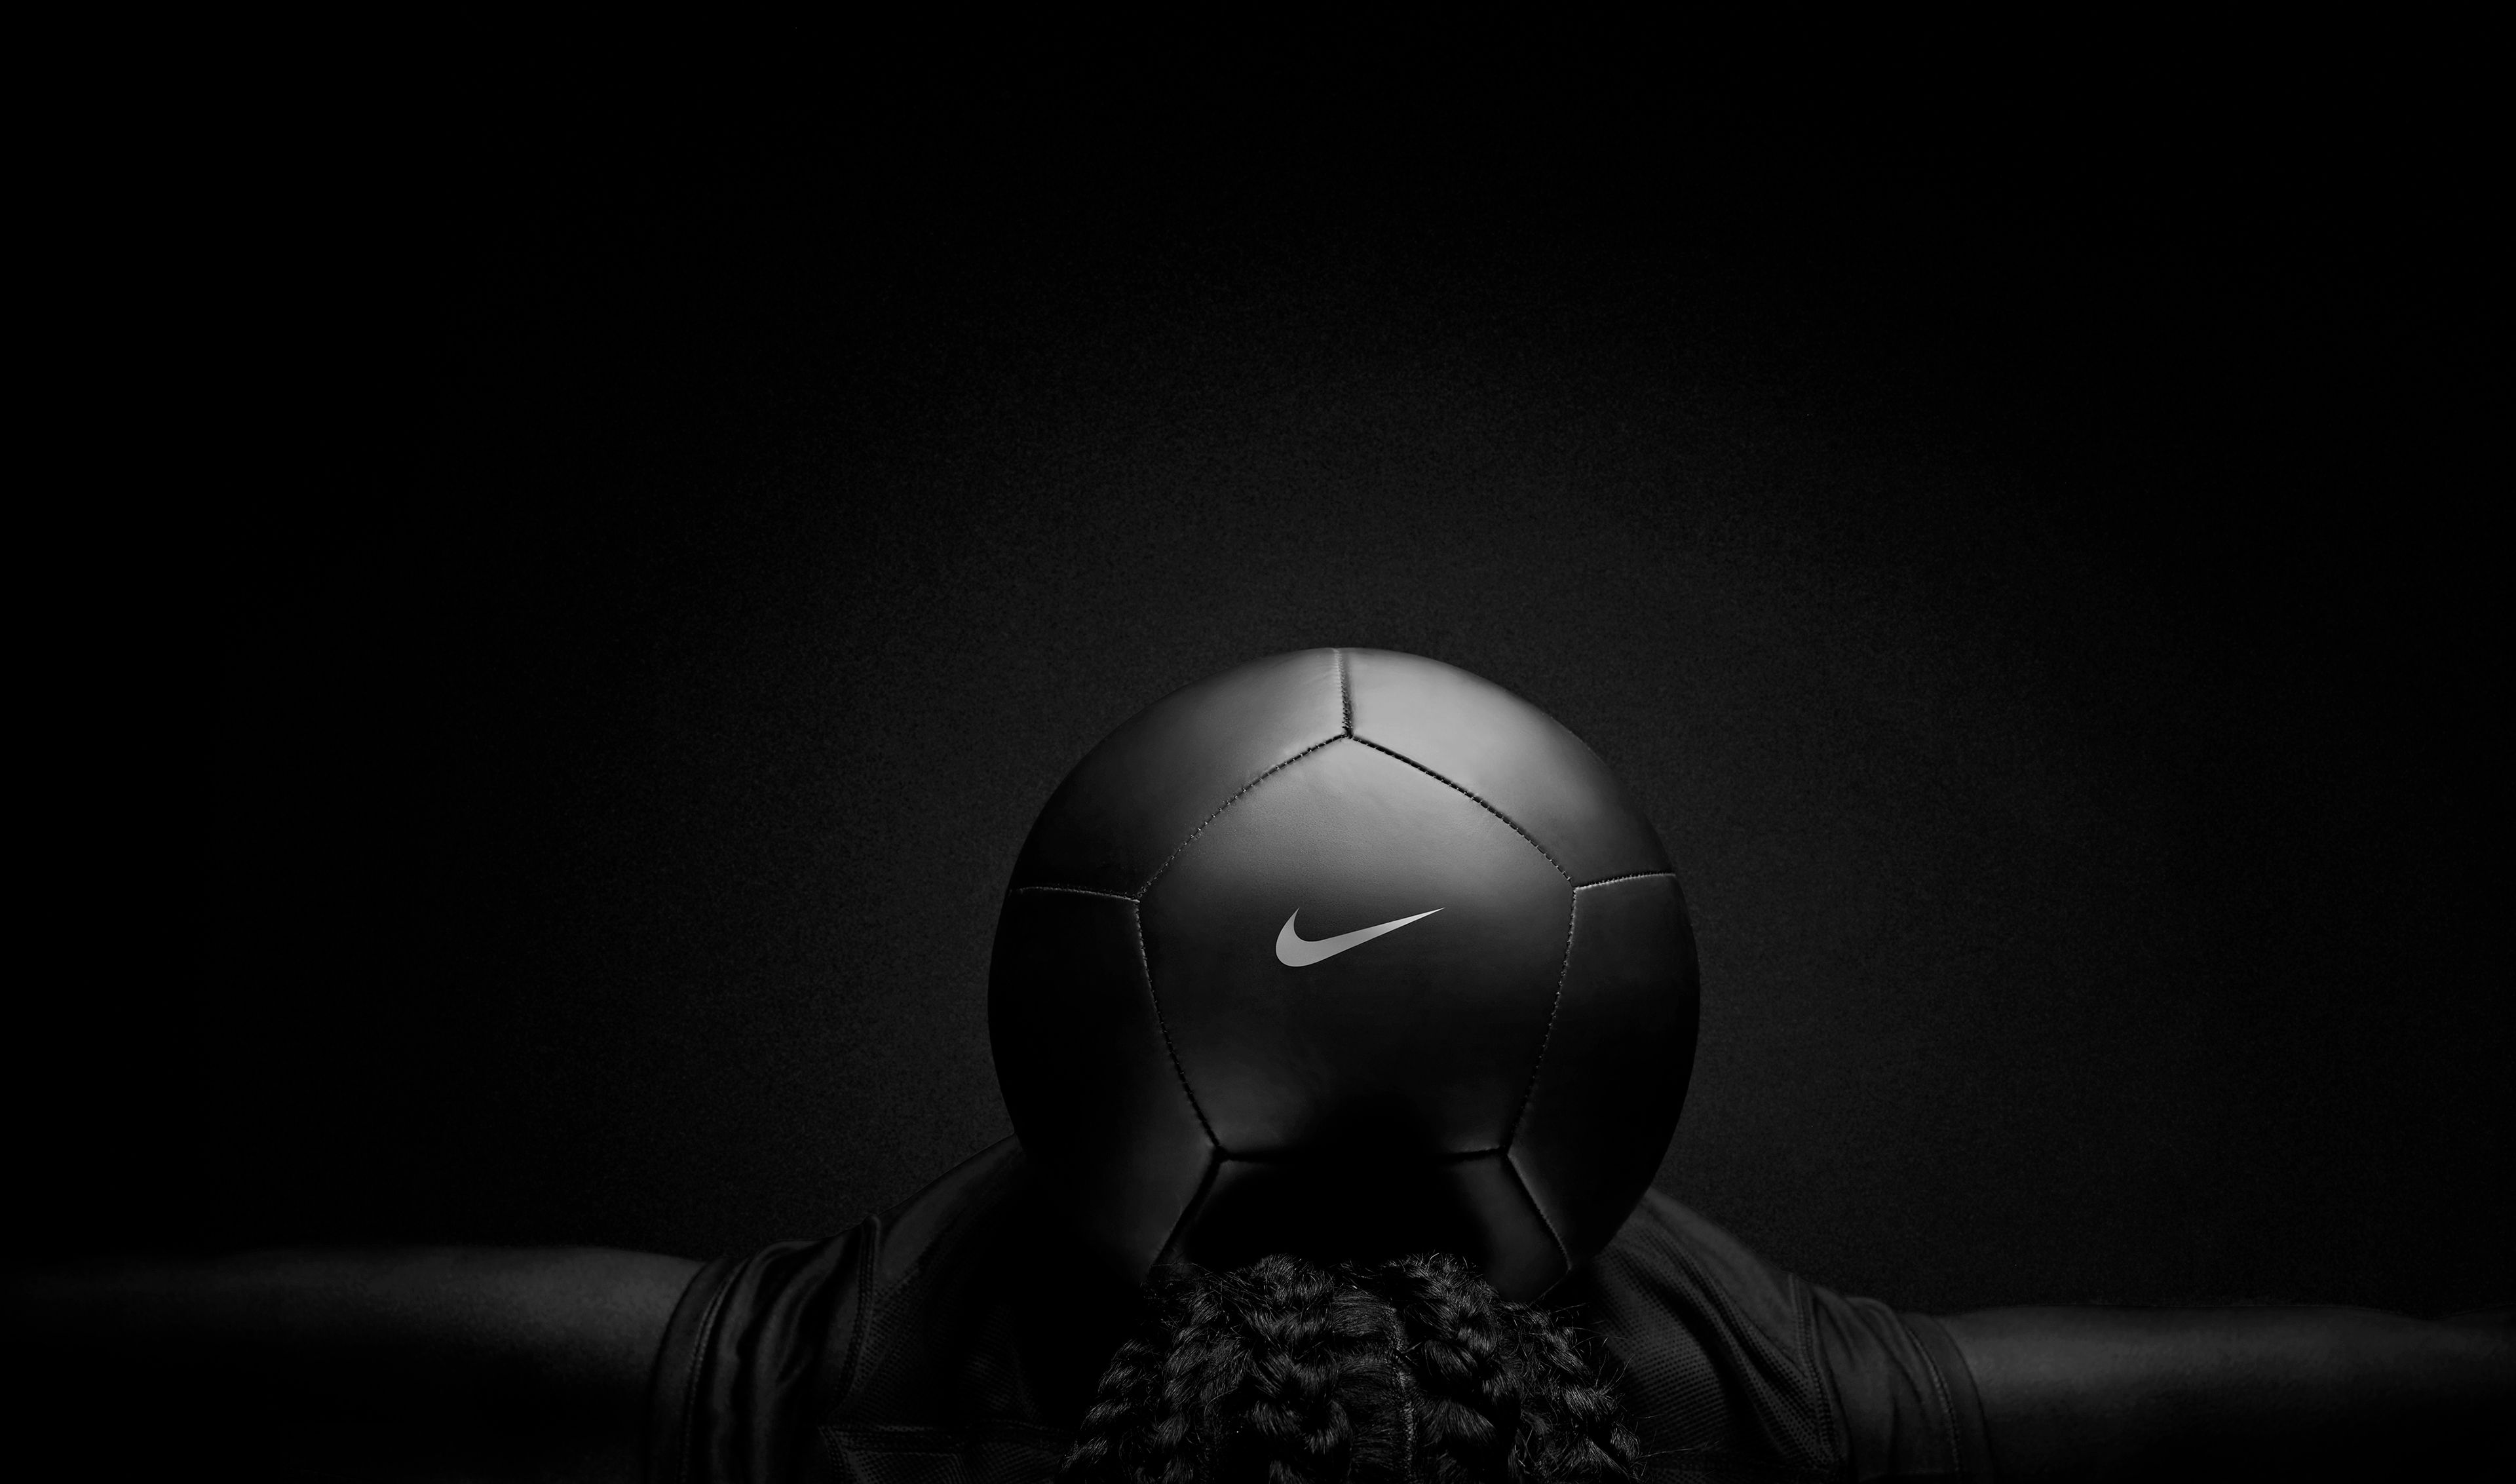 Nike Black Play Football, HD Sports, 4k Wallpaper, Image, Background, Photo and Picture